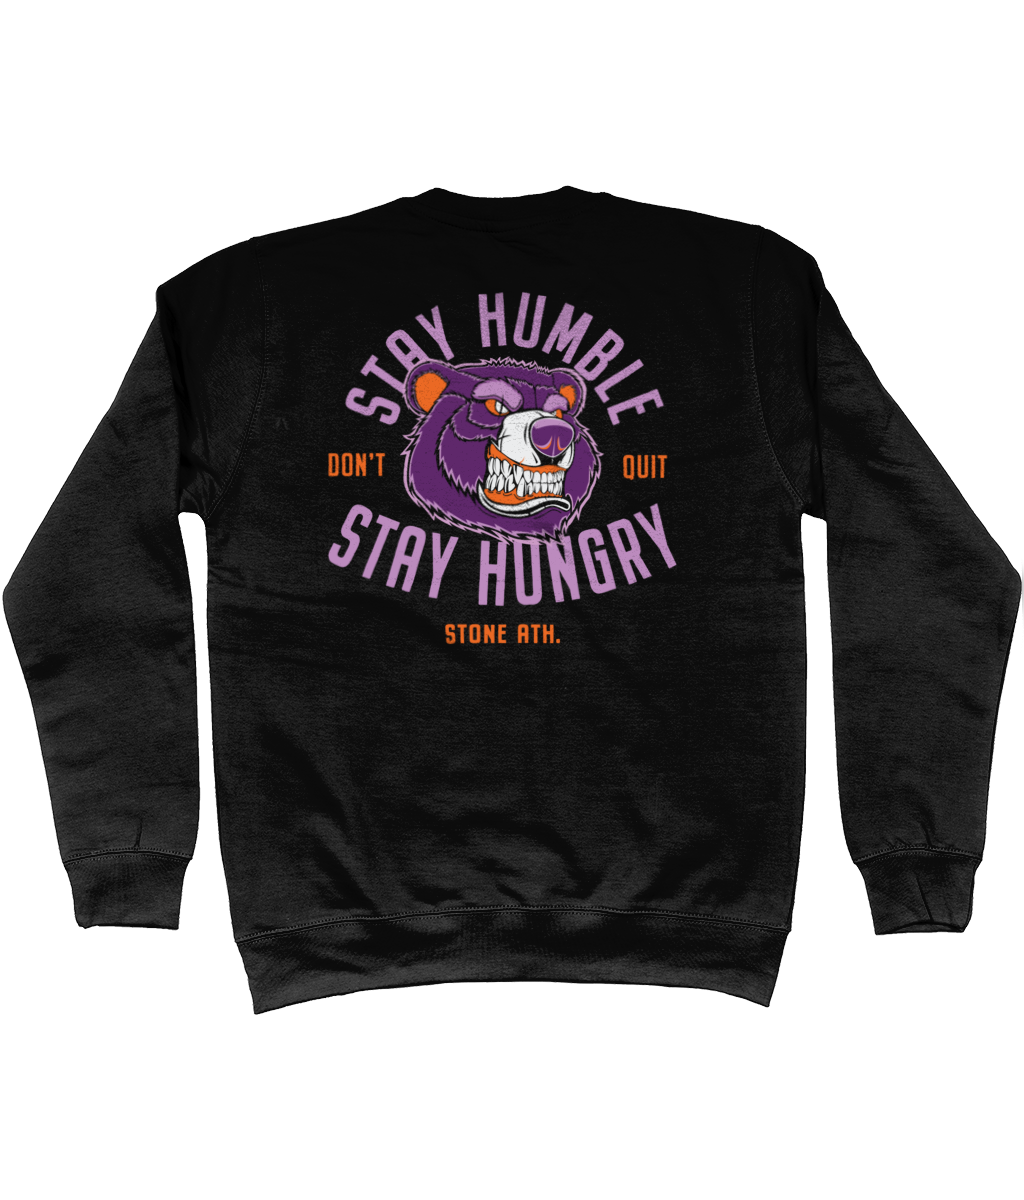 Stay Humble, Stay Hungry Jumper - Vibrant